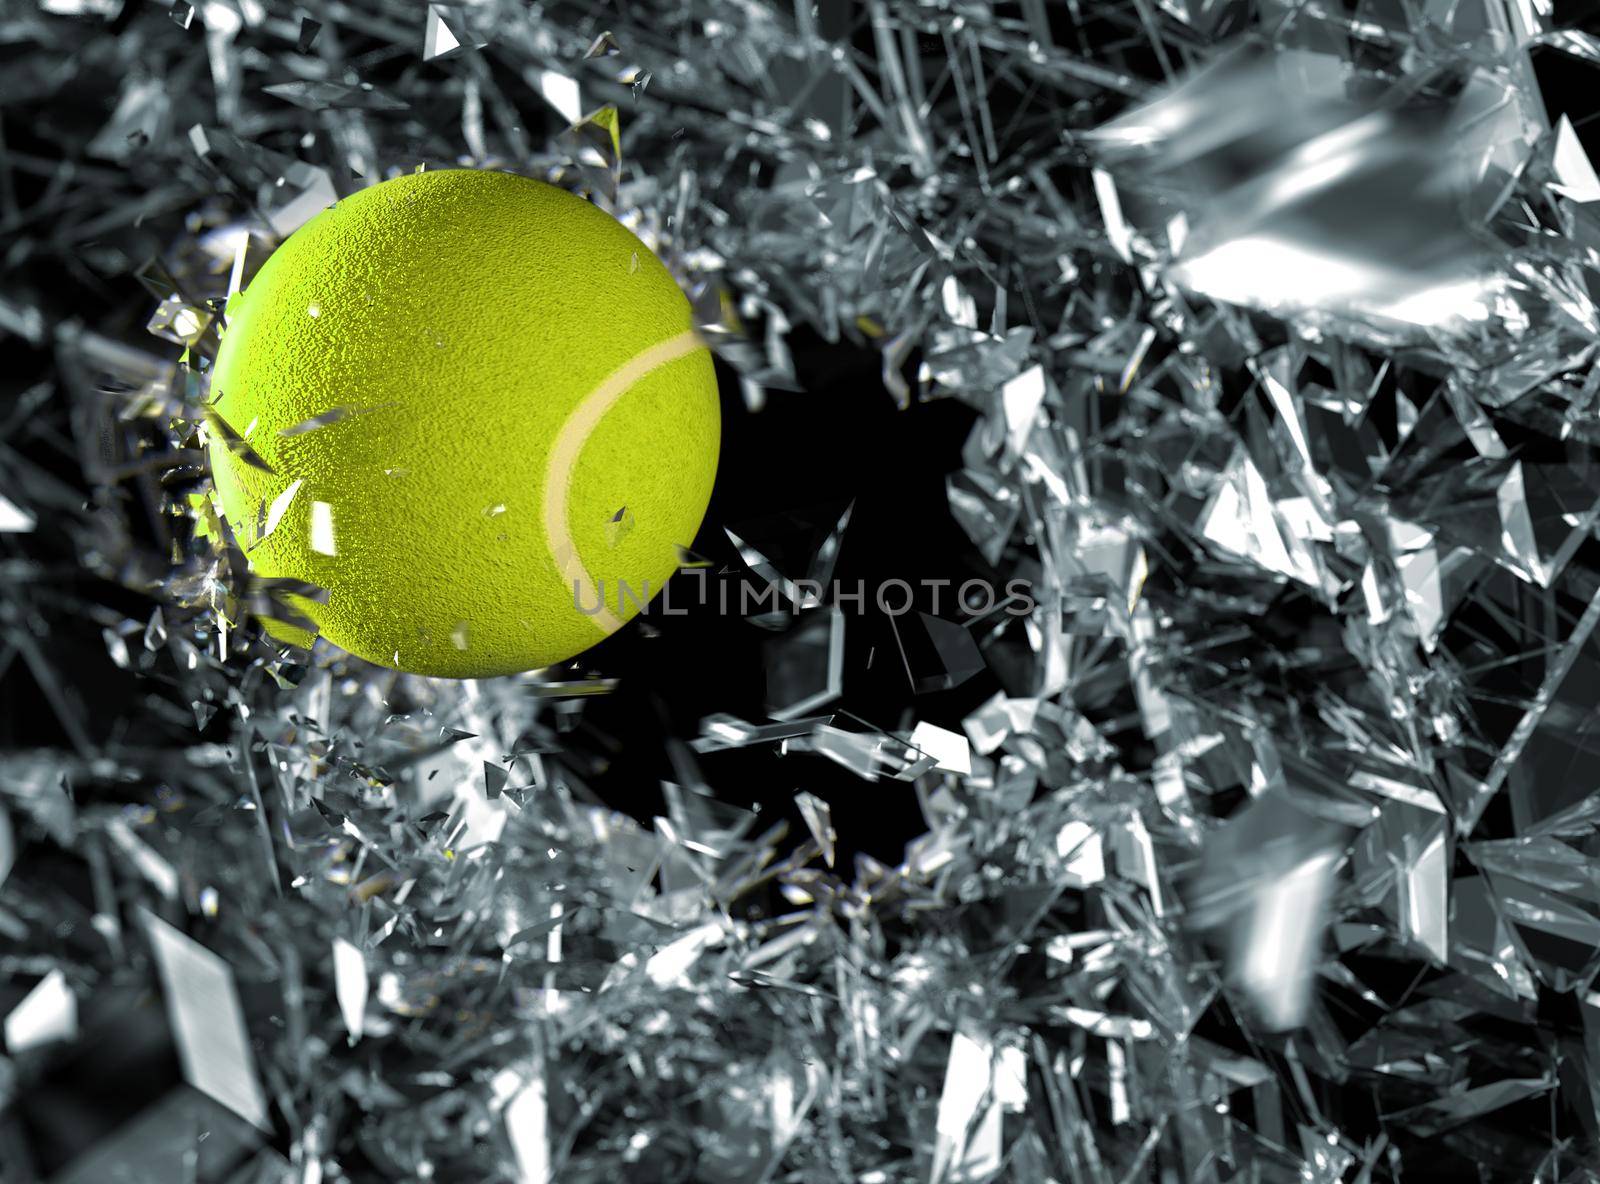 Tennis ball in motion breaking the glass.Concept of action and strength in team sport